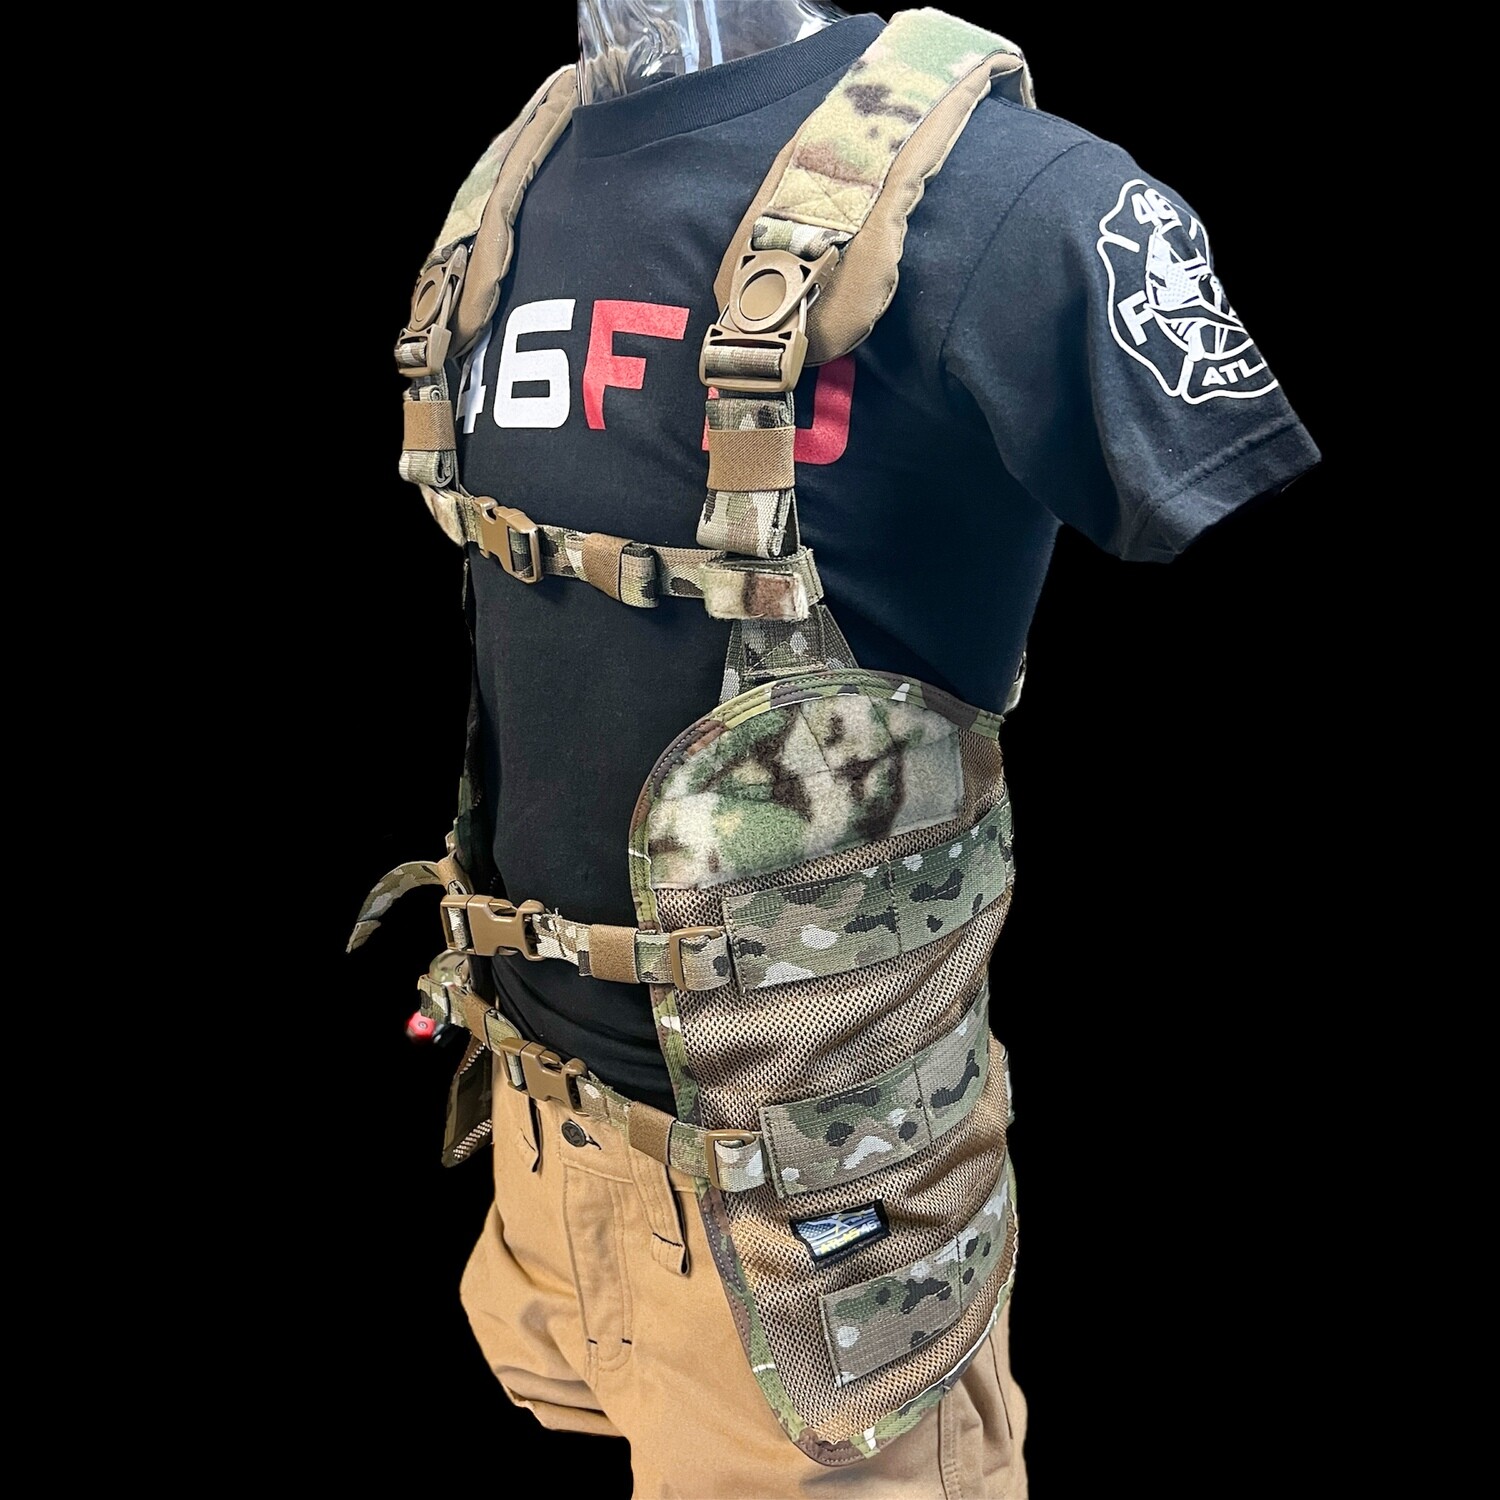 Stratos Open Core Tool Vest - Coyote/MultiCam - Limited Edition